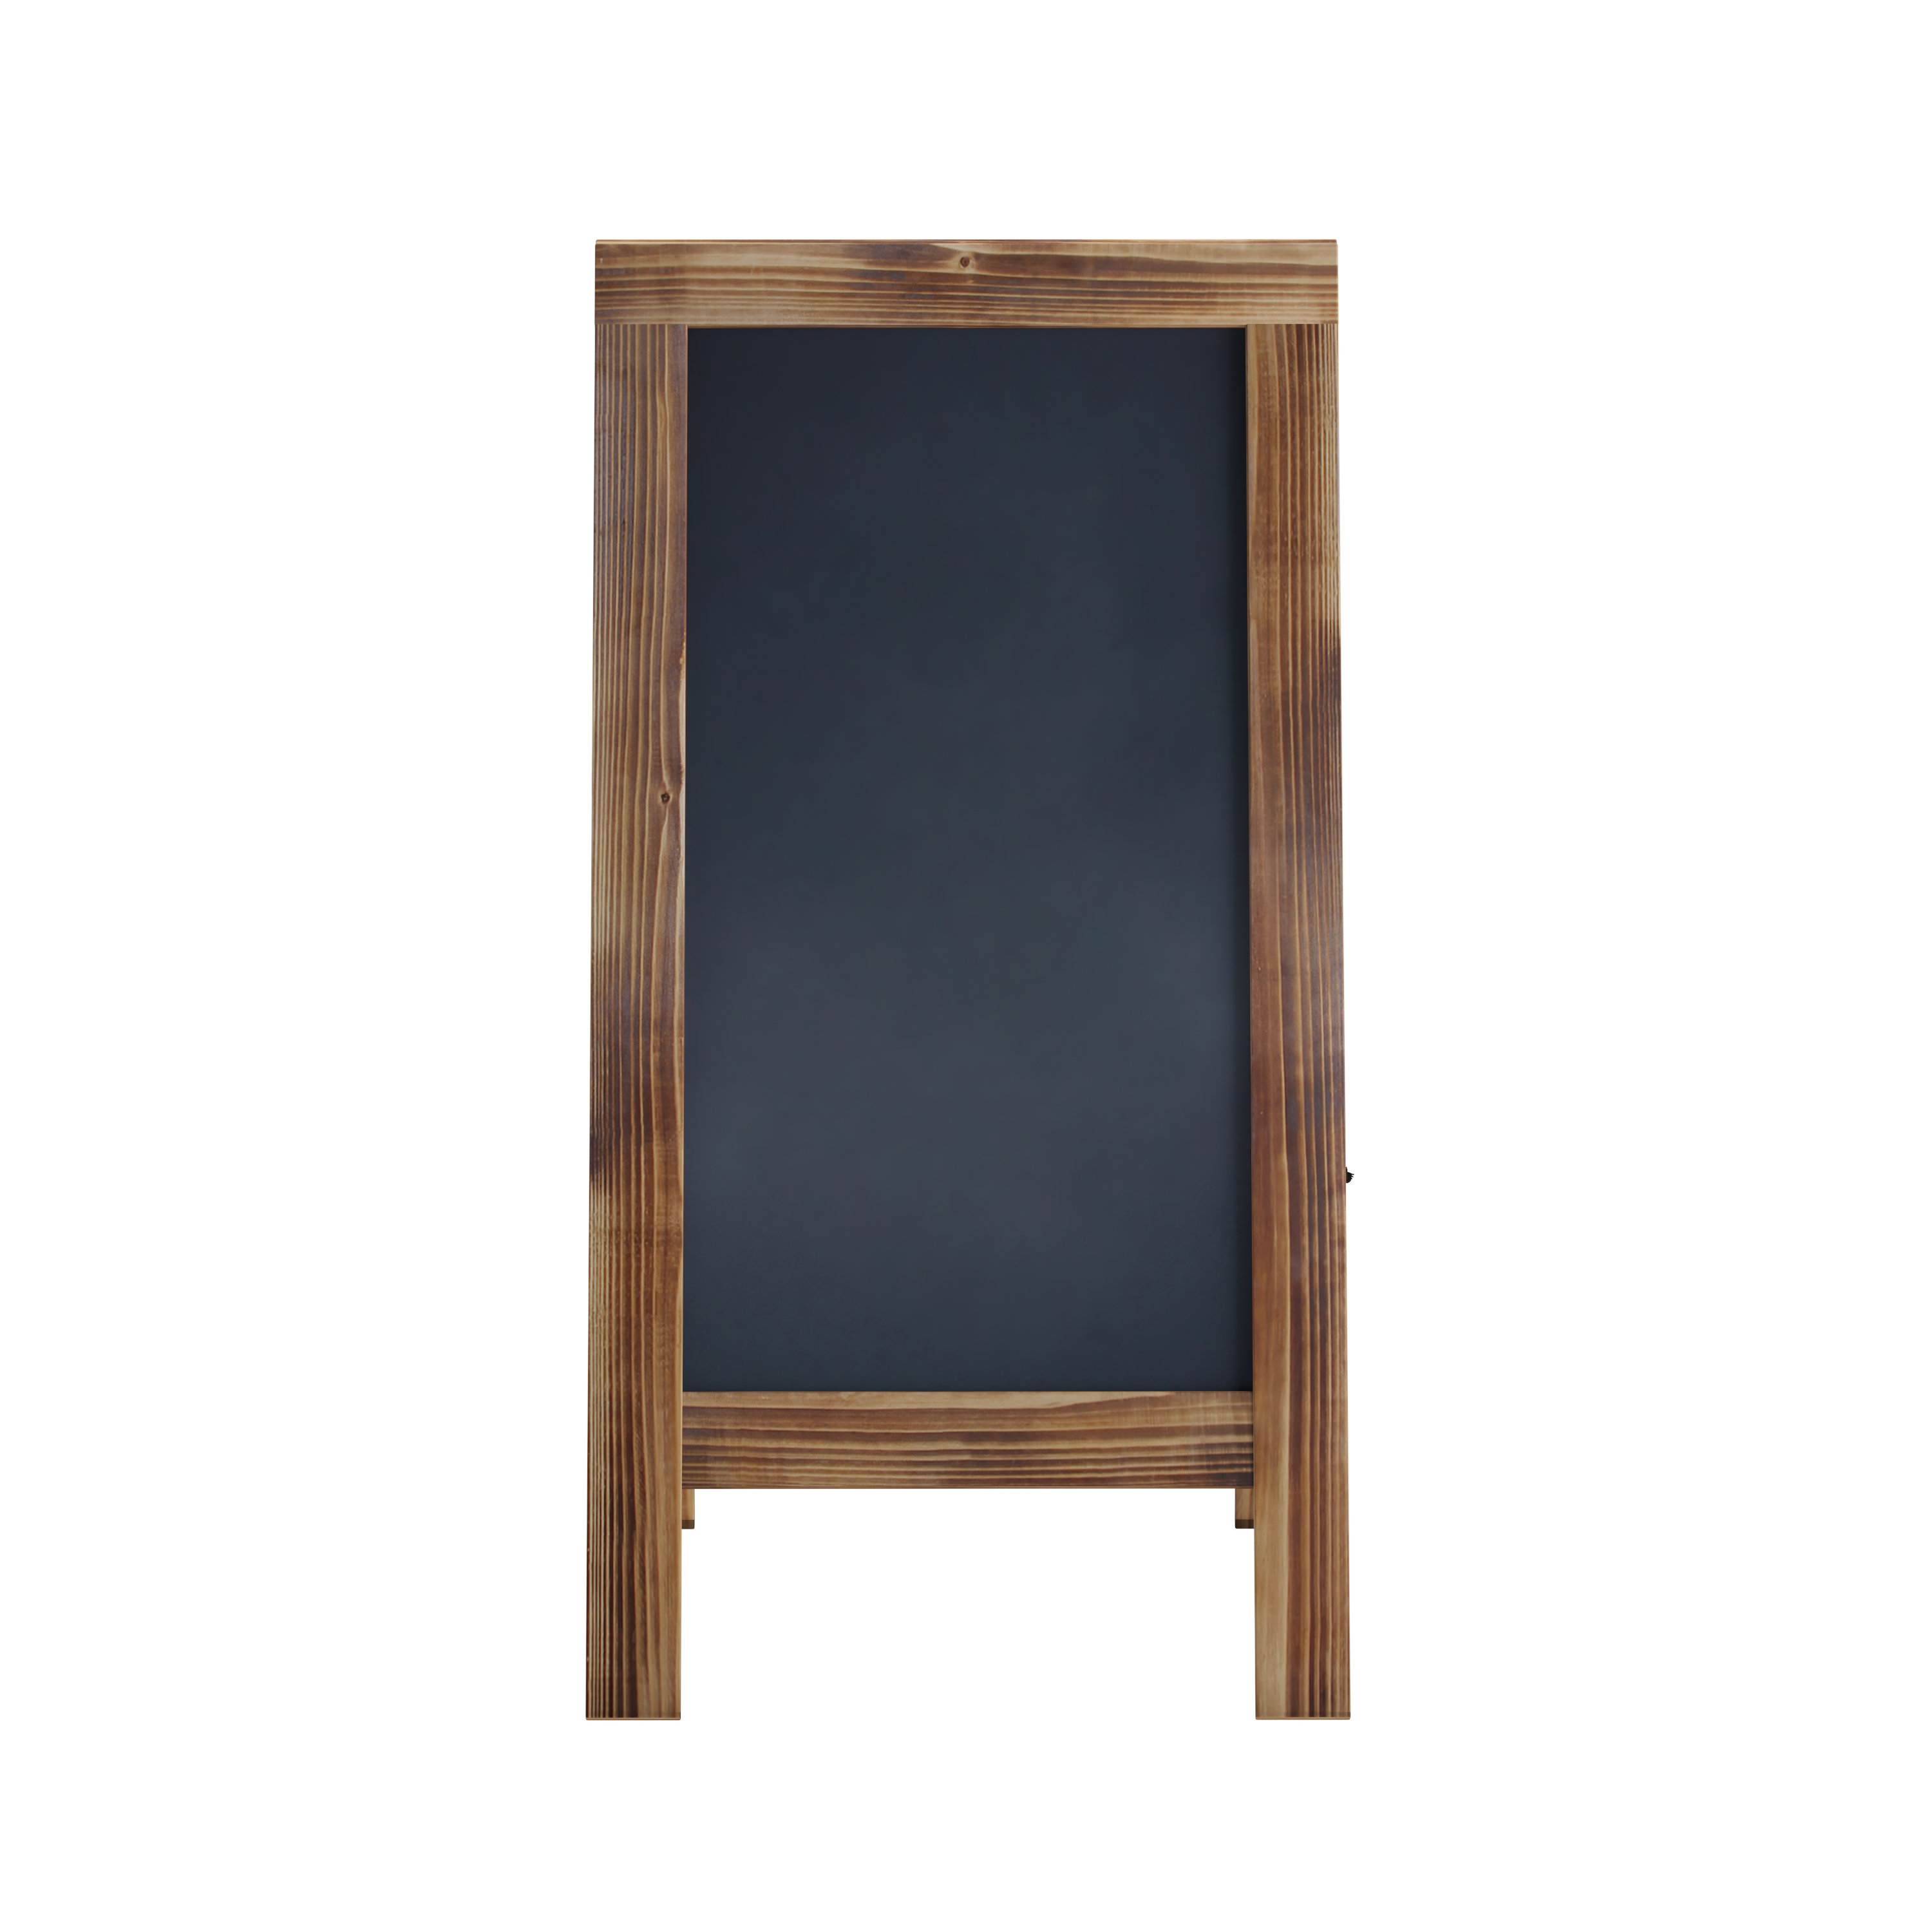 Small Chalkboard Signs with Stand – Deep Black, Slate Chalk-Board 11x14 | Magnetic, Non-Porous Surface with Rustic Pine Wood Frame | Tabletop